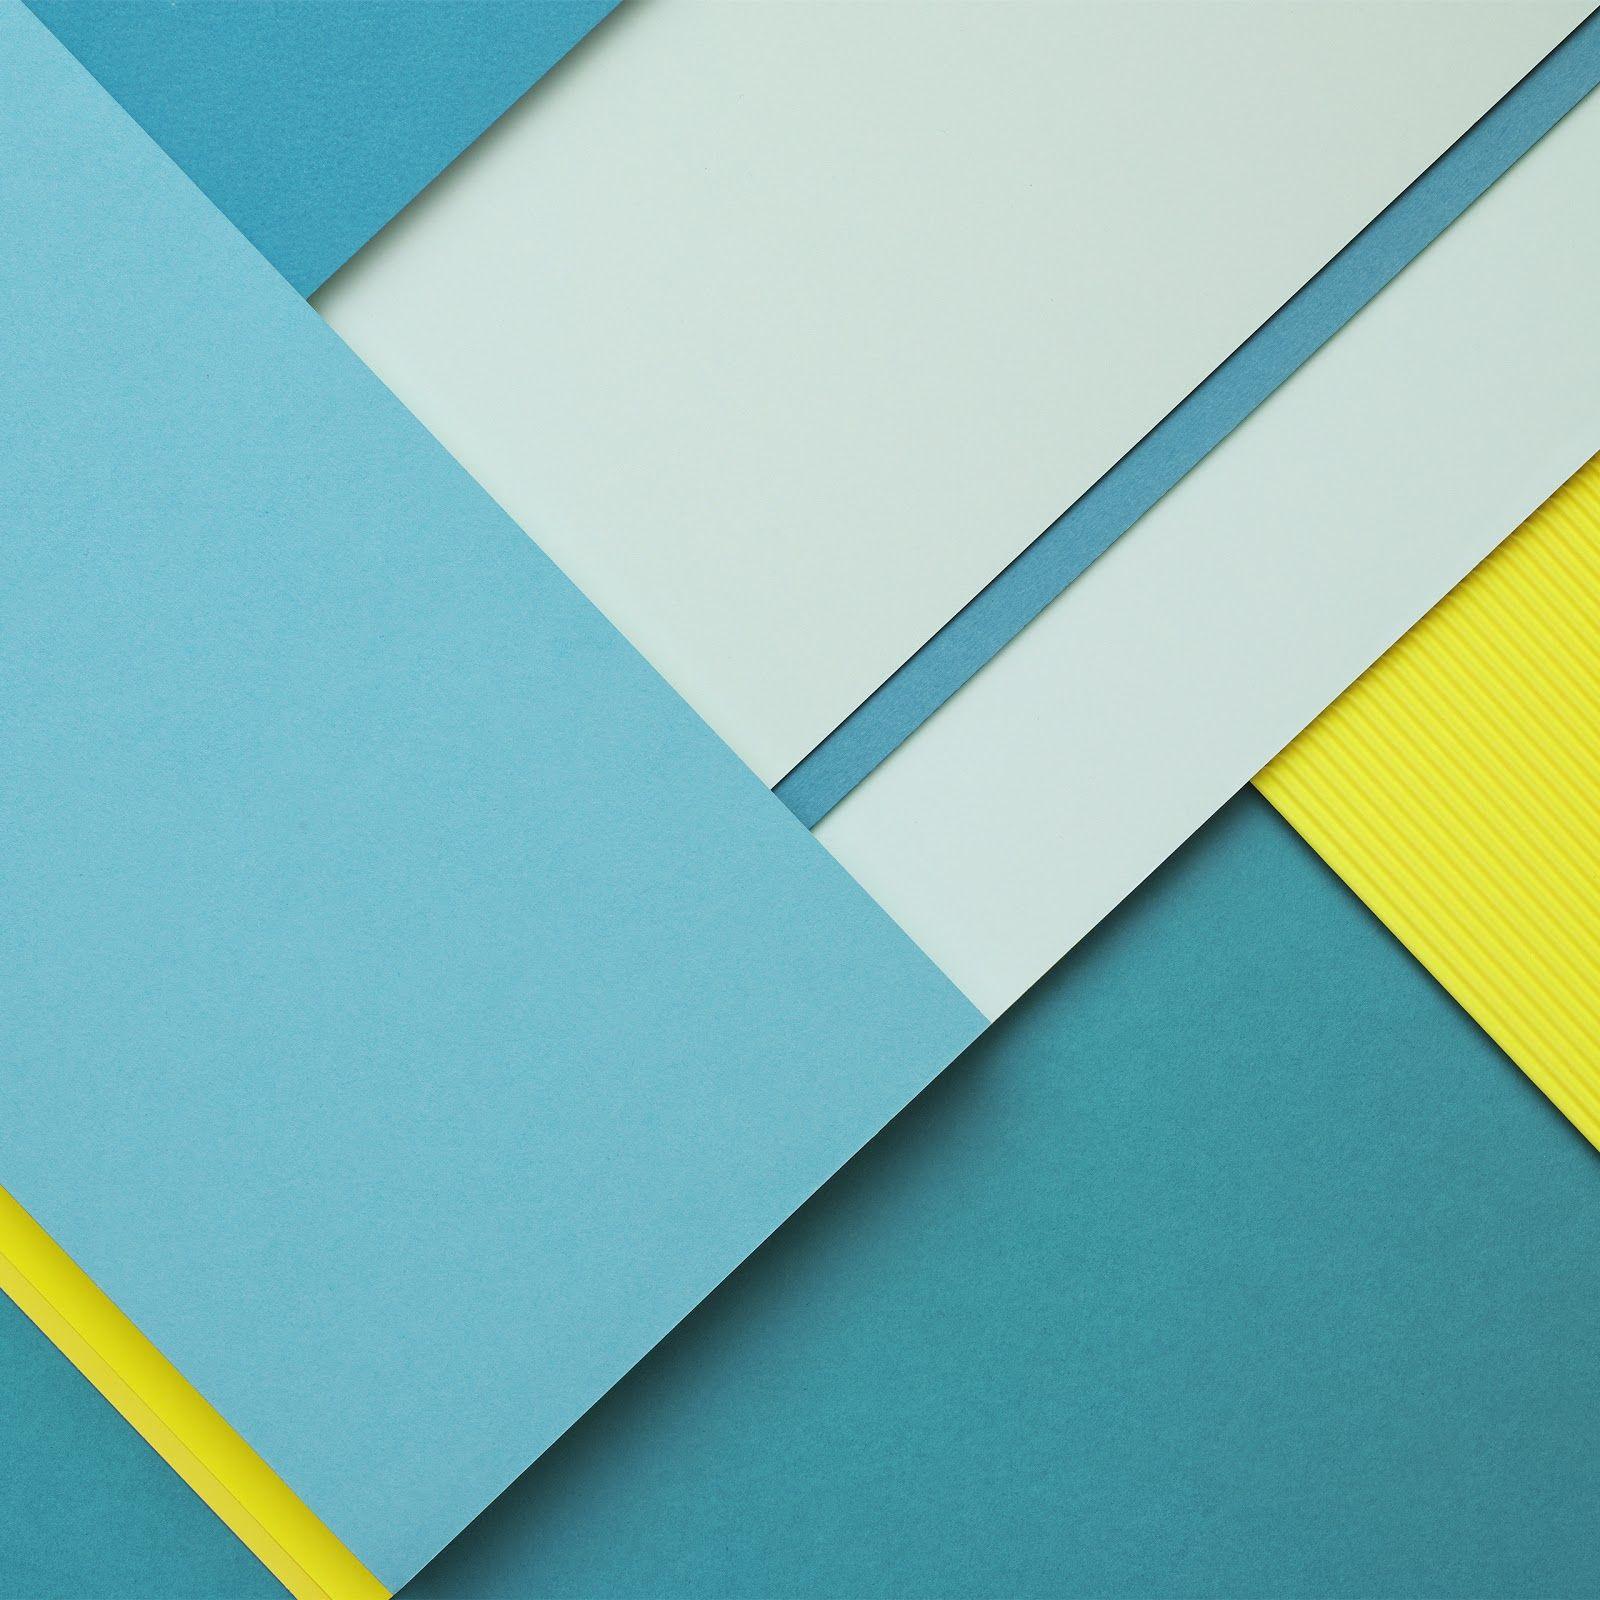 141 Awesome Material Design Wallpapers. : Android